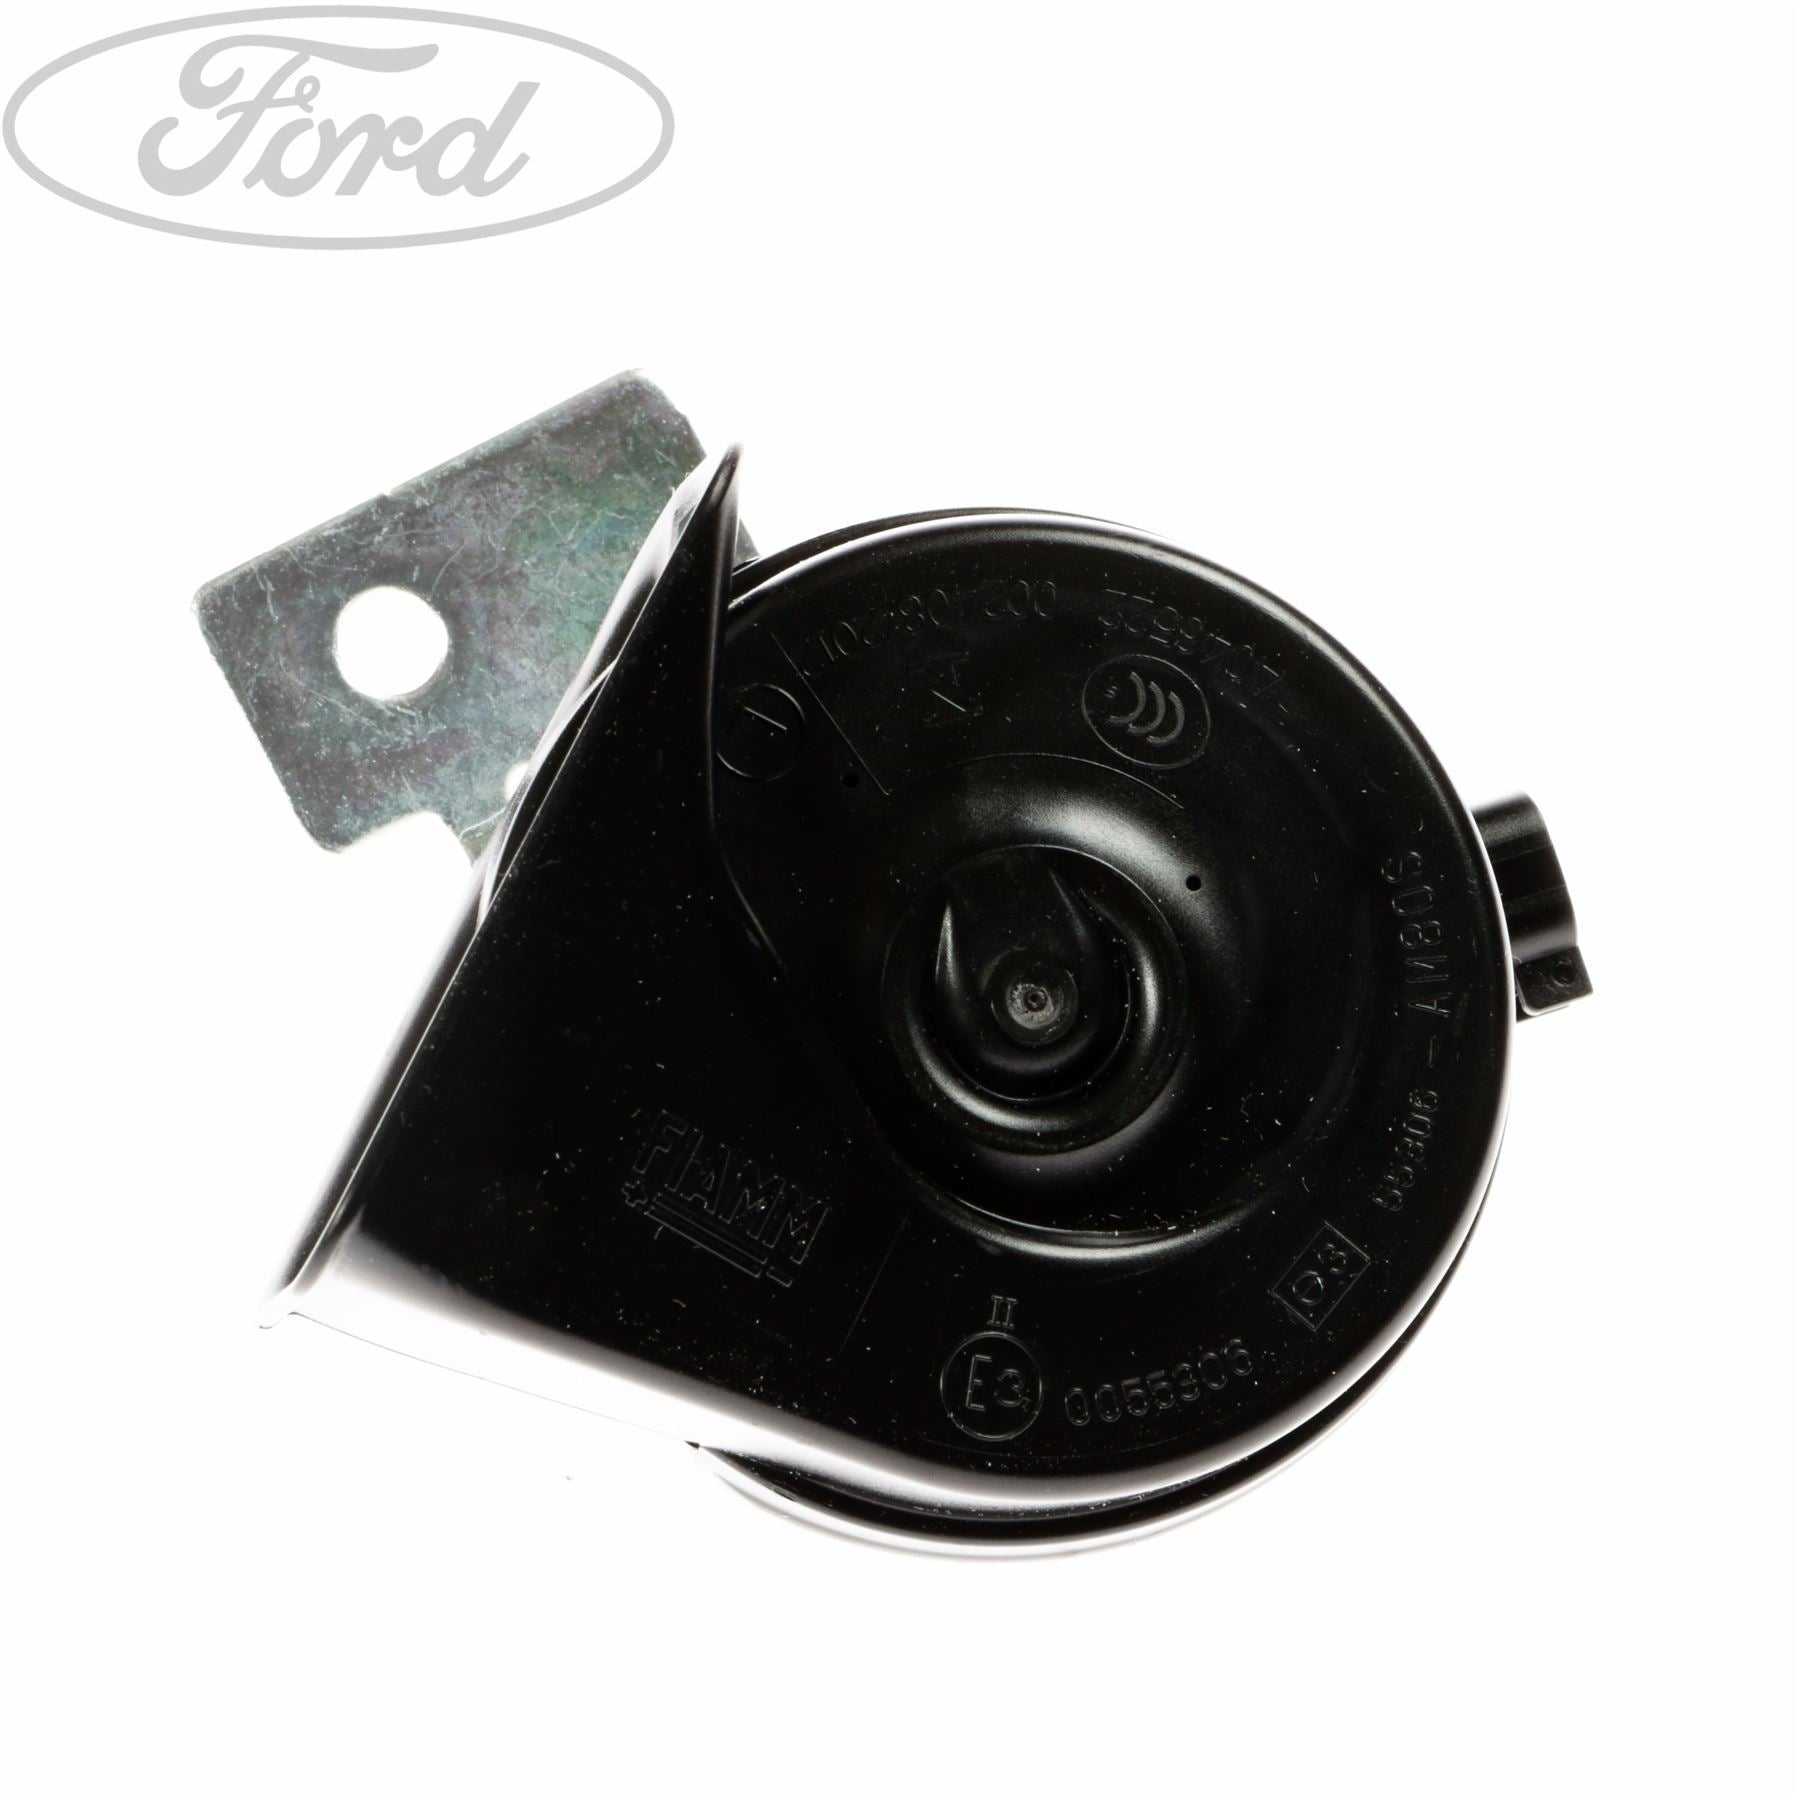 Ford, TRANSIT LOW PITCH CAR HORN